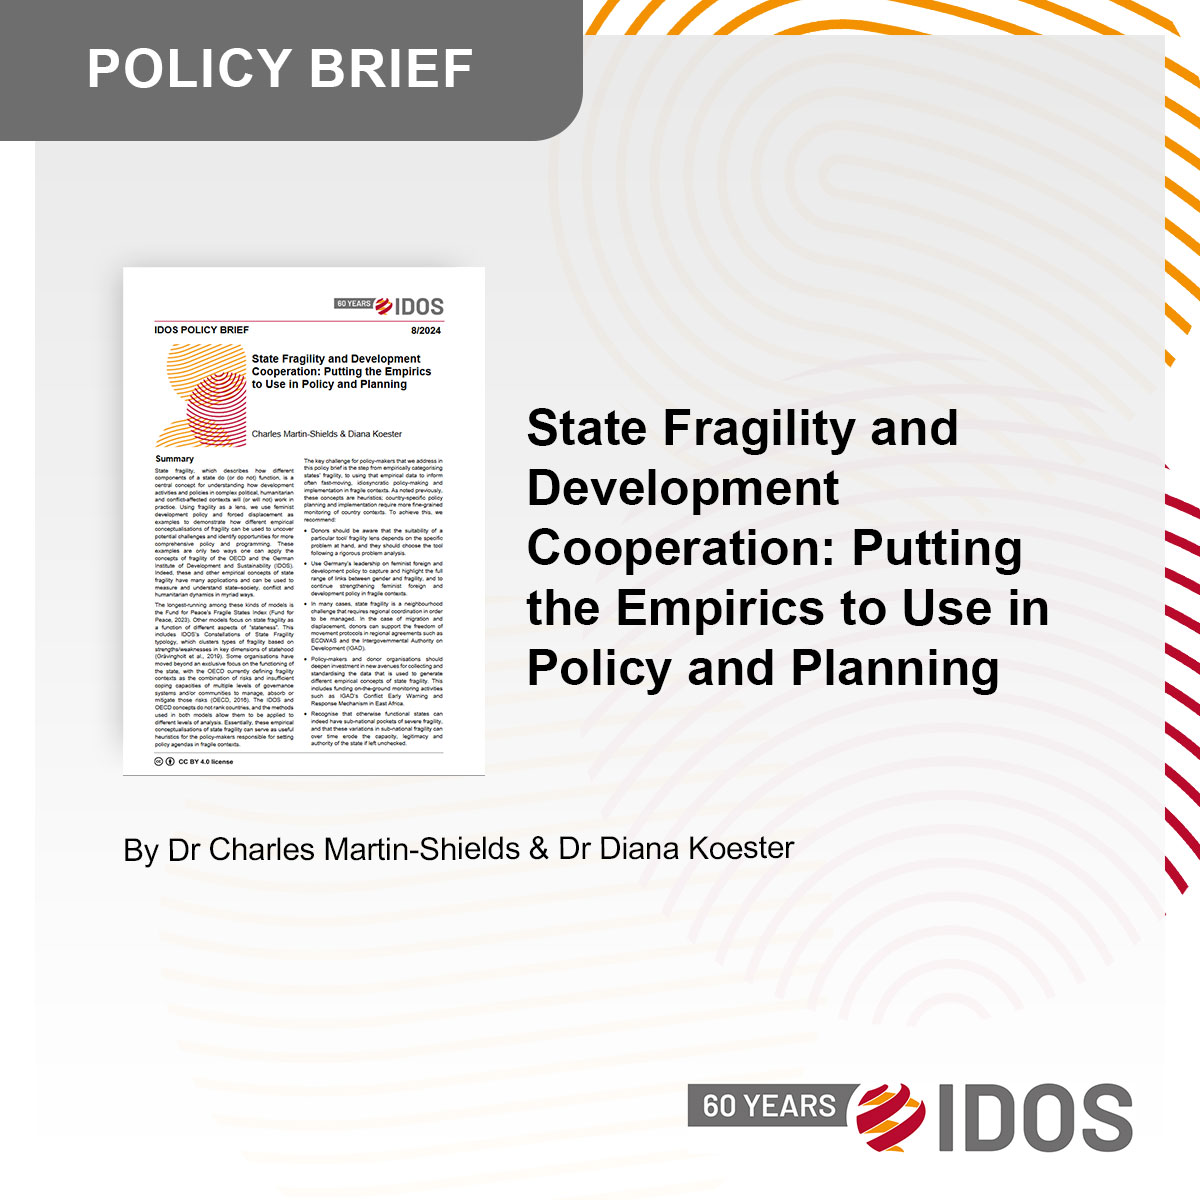 📚 IDOS #PolicyBrief The concept of #StateFragility is a useful lens for planning #DevelopmentPolicy in complex settings. @cmartinshields & Diana Koester show how to apply the @IDOS_research and @OECD fragility concepts of critical policy issues: idos-research.de/policy-brief/a….